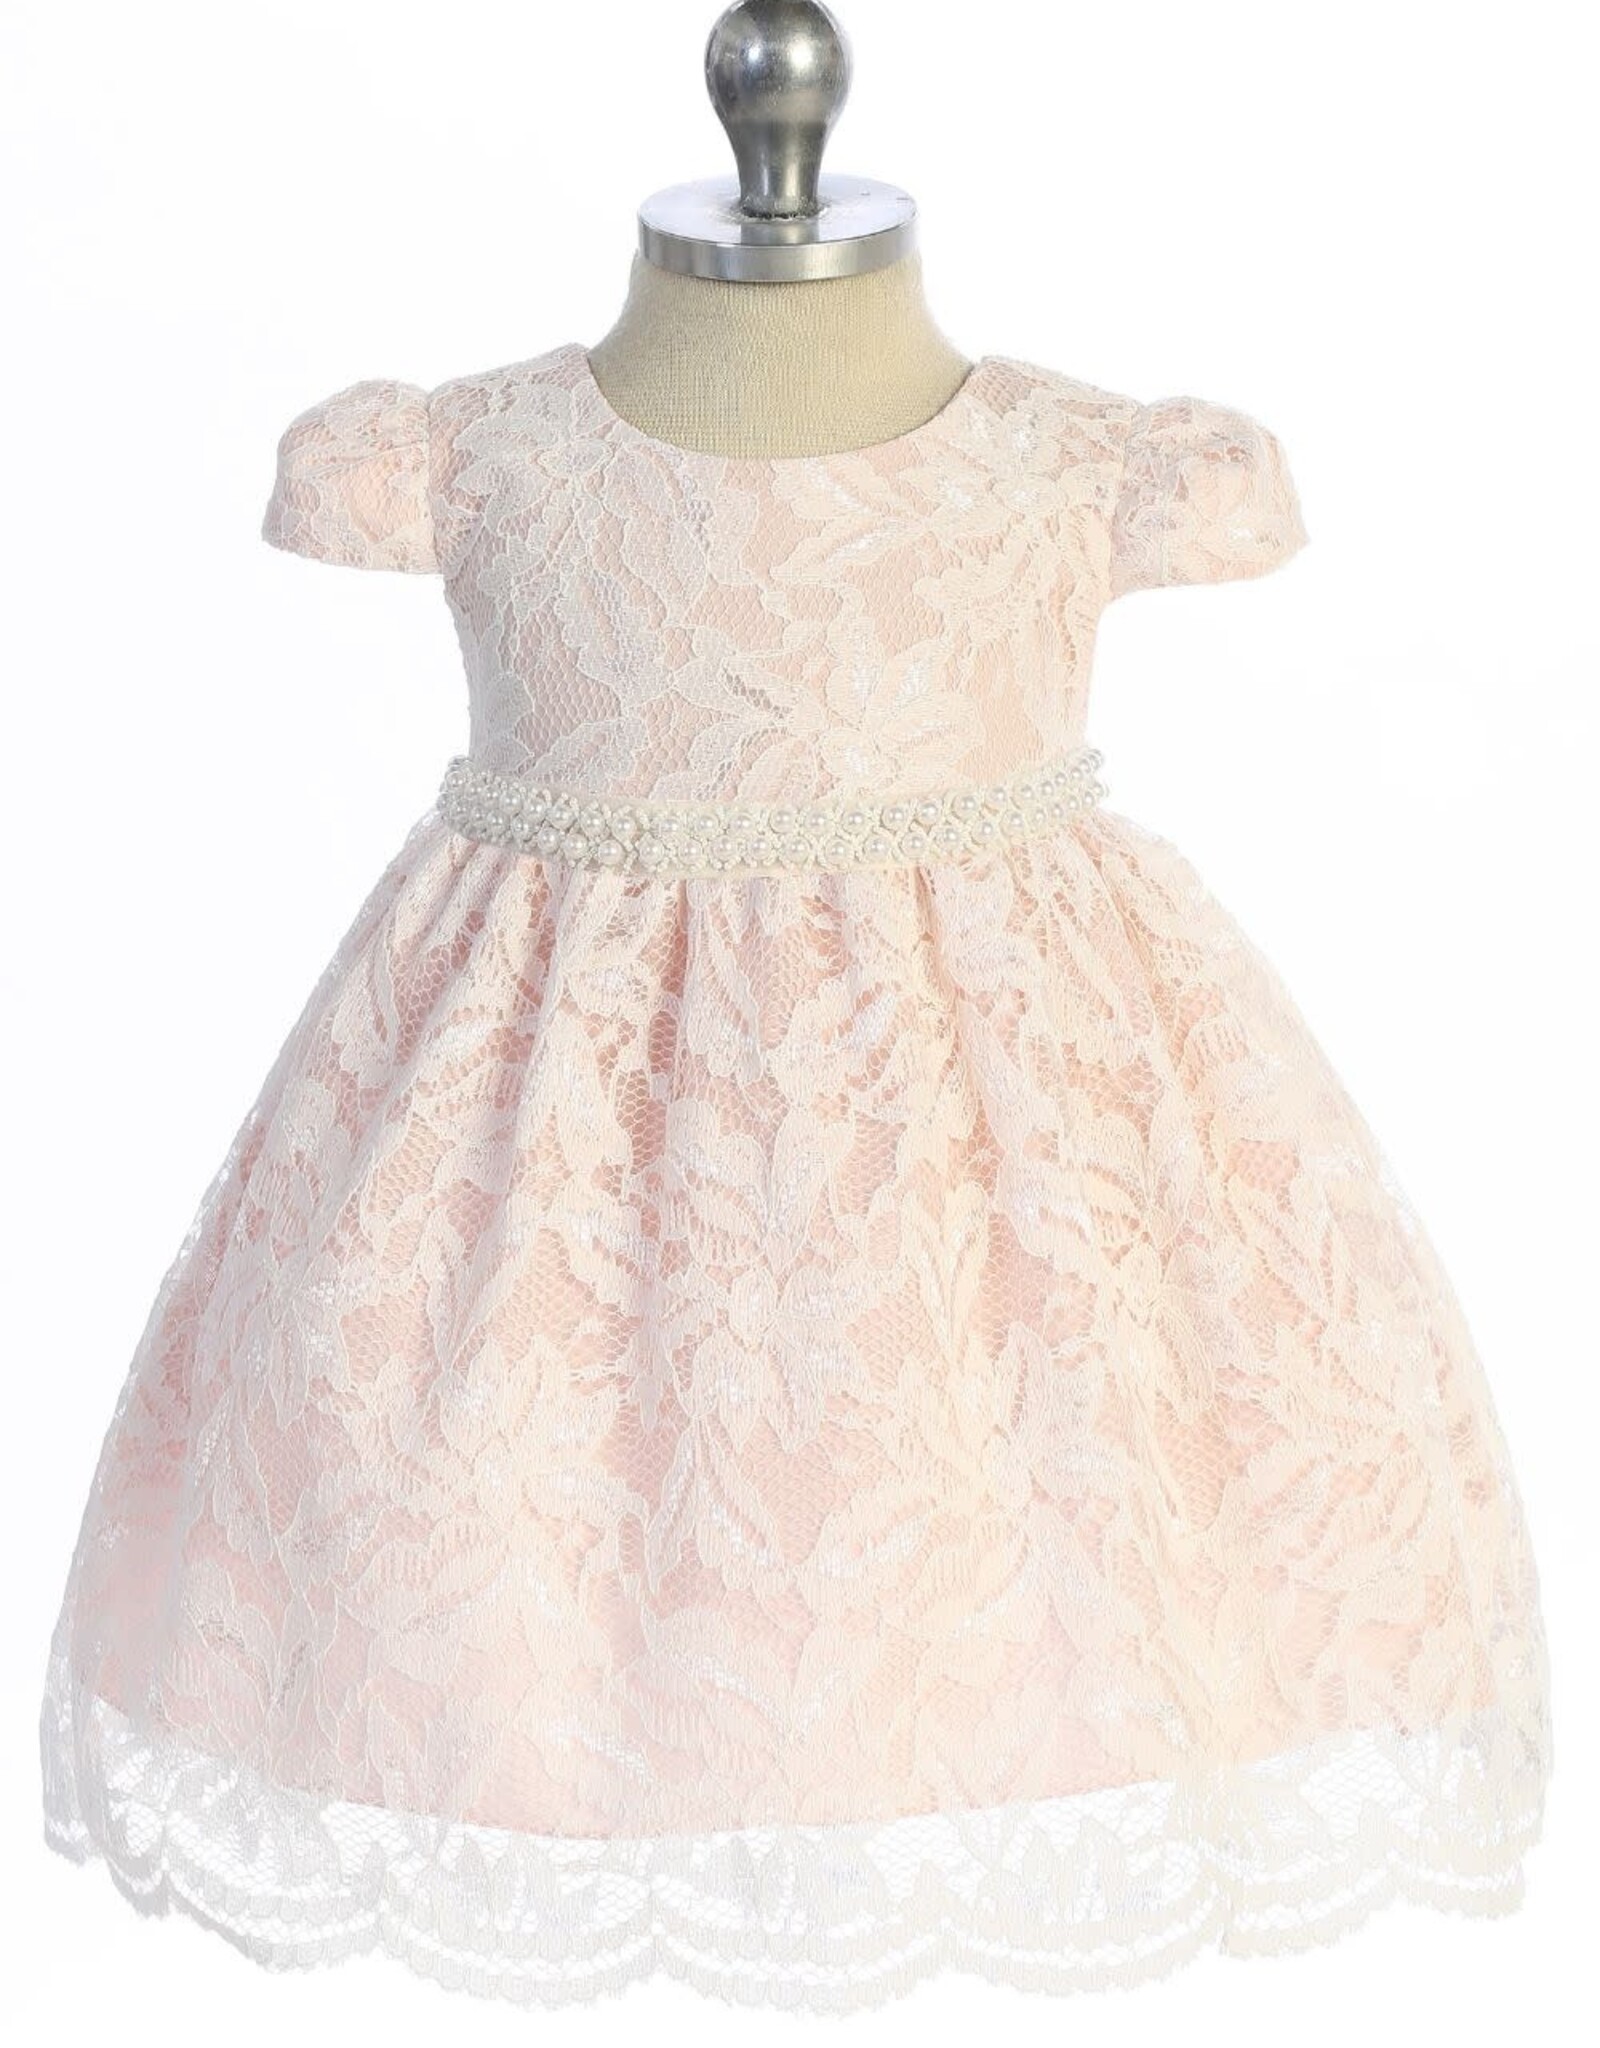 Baby V-Back Bow Lace Dress w/Pearl Trim